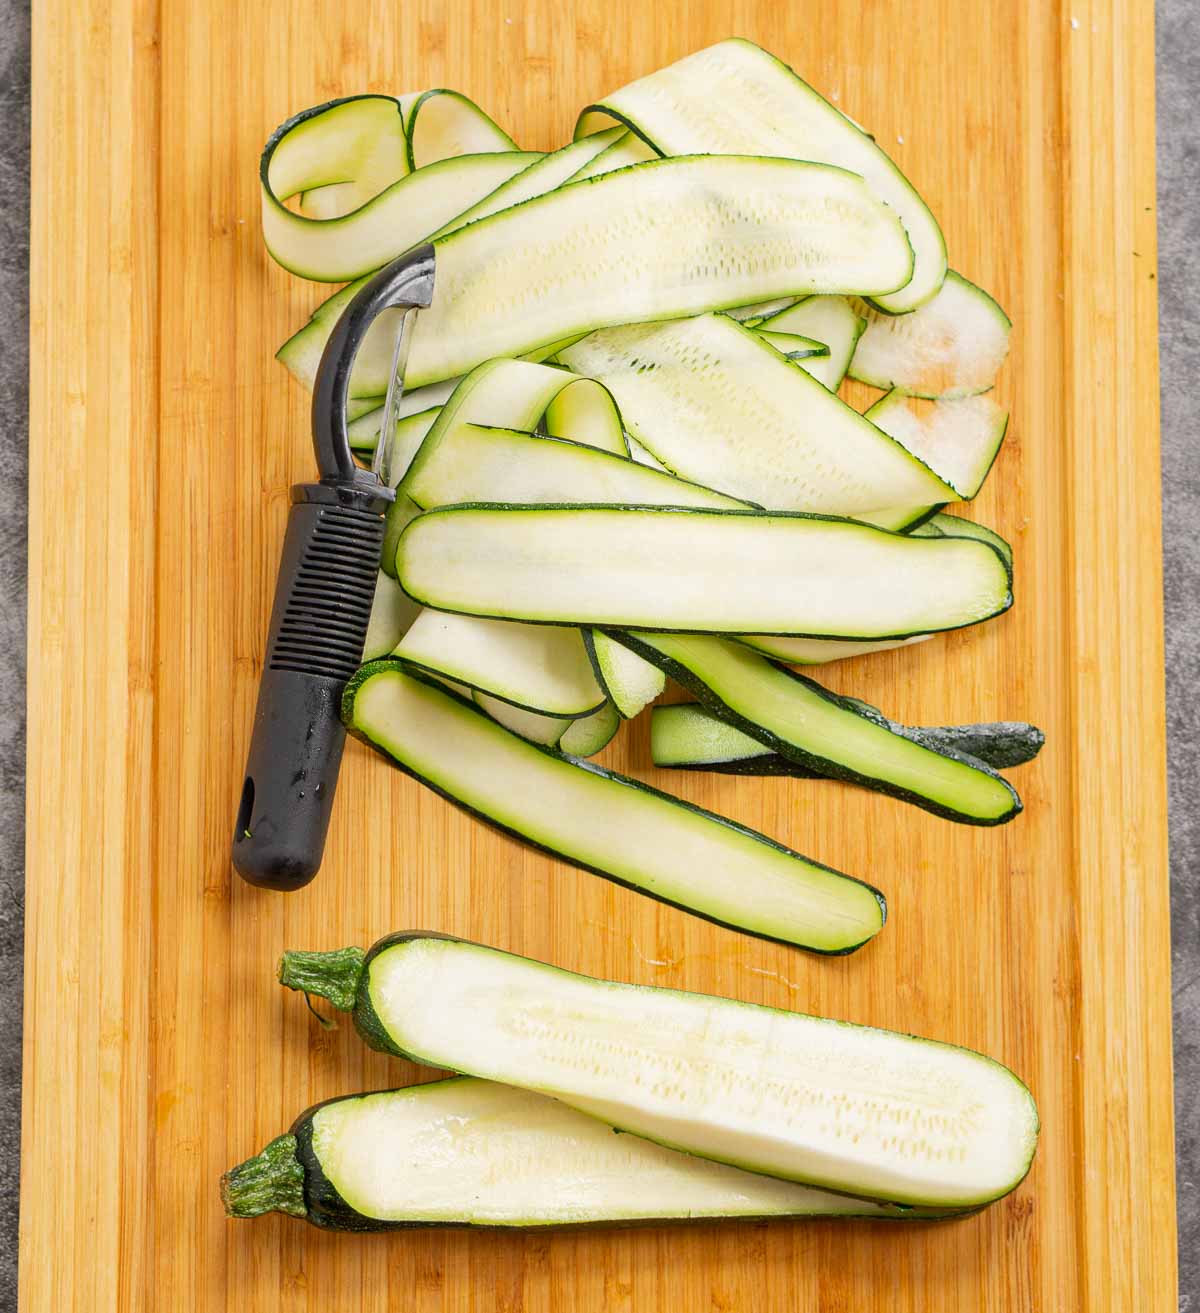 Sliced zucchini ribbons on a cutting board next to a vegetable peeler